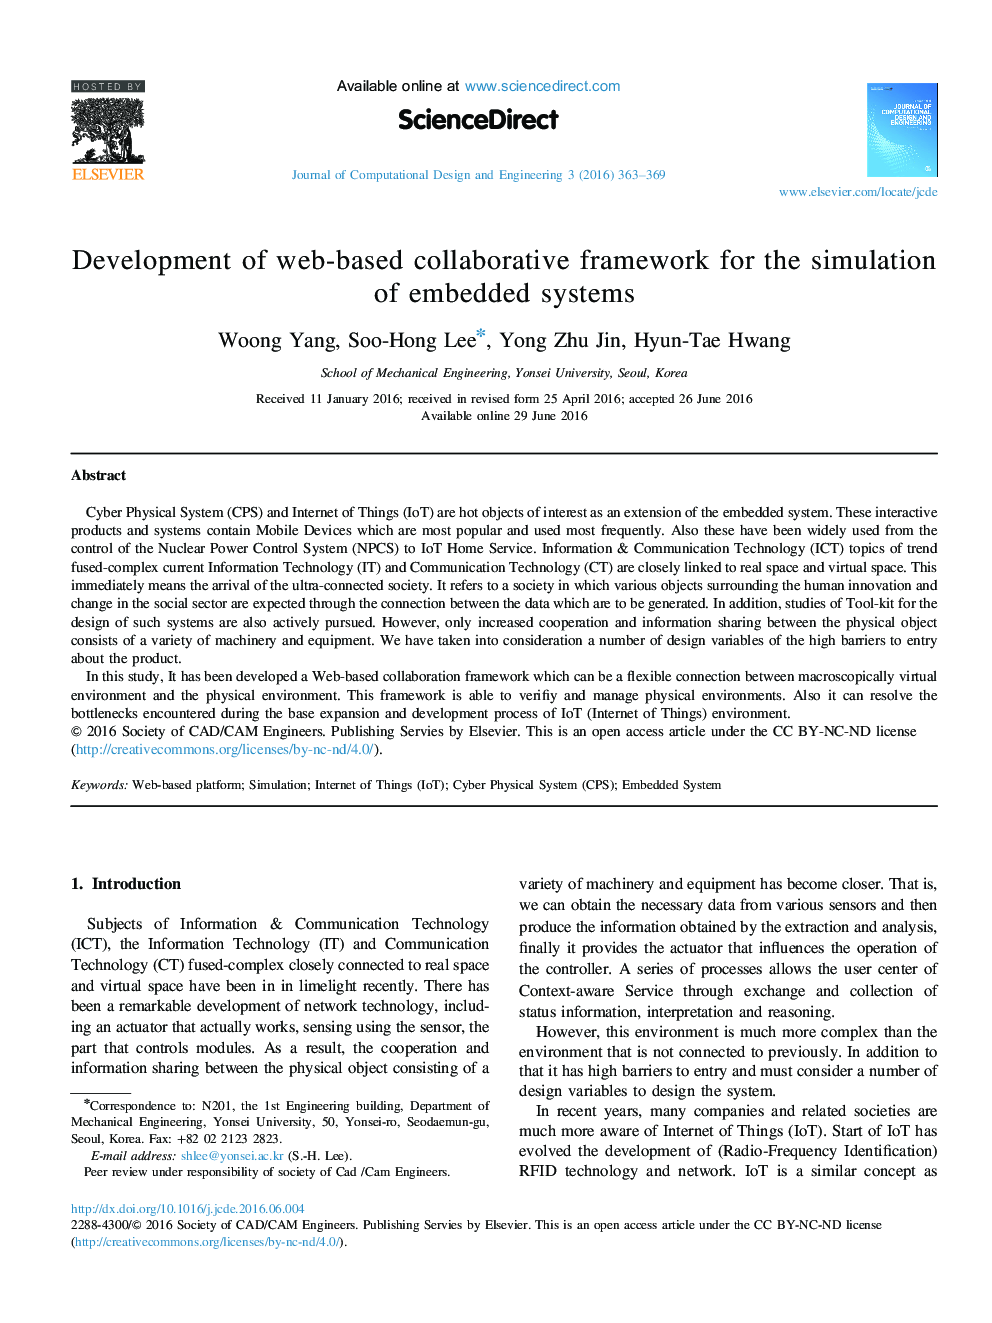 Development of web-based collaborative framework for the simulation of embedded systems